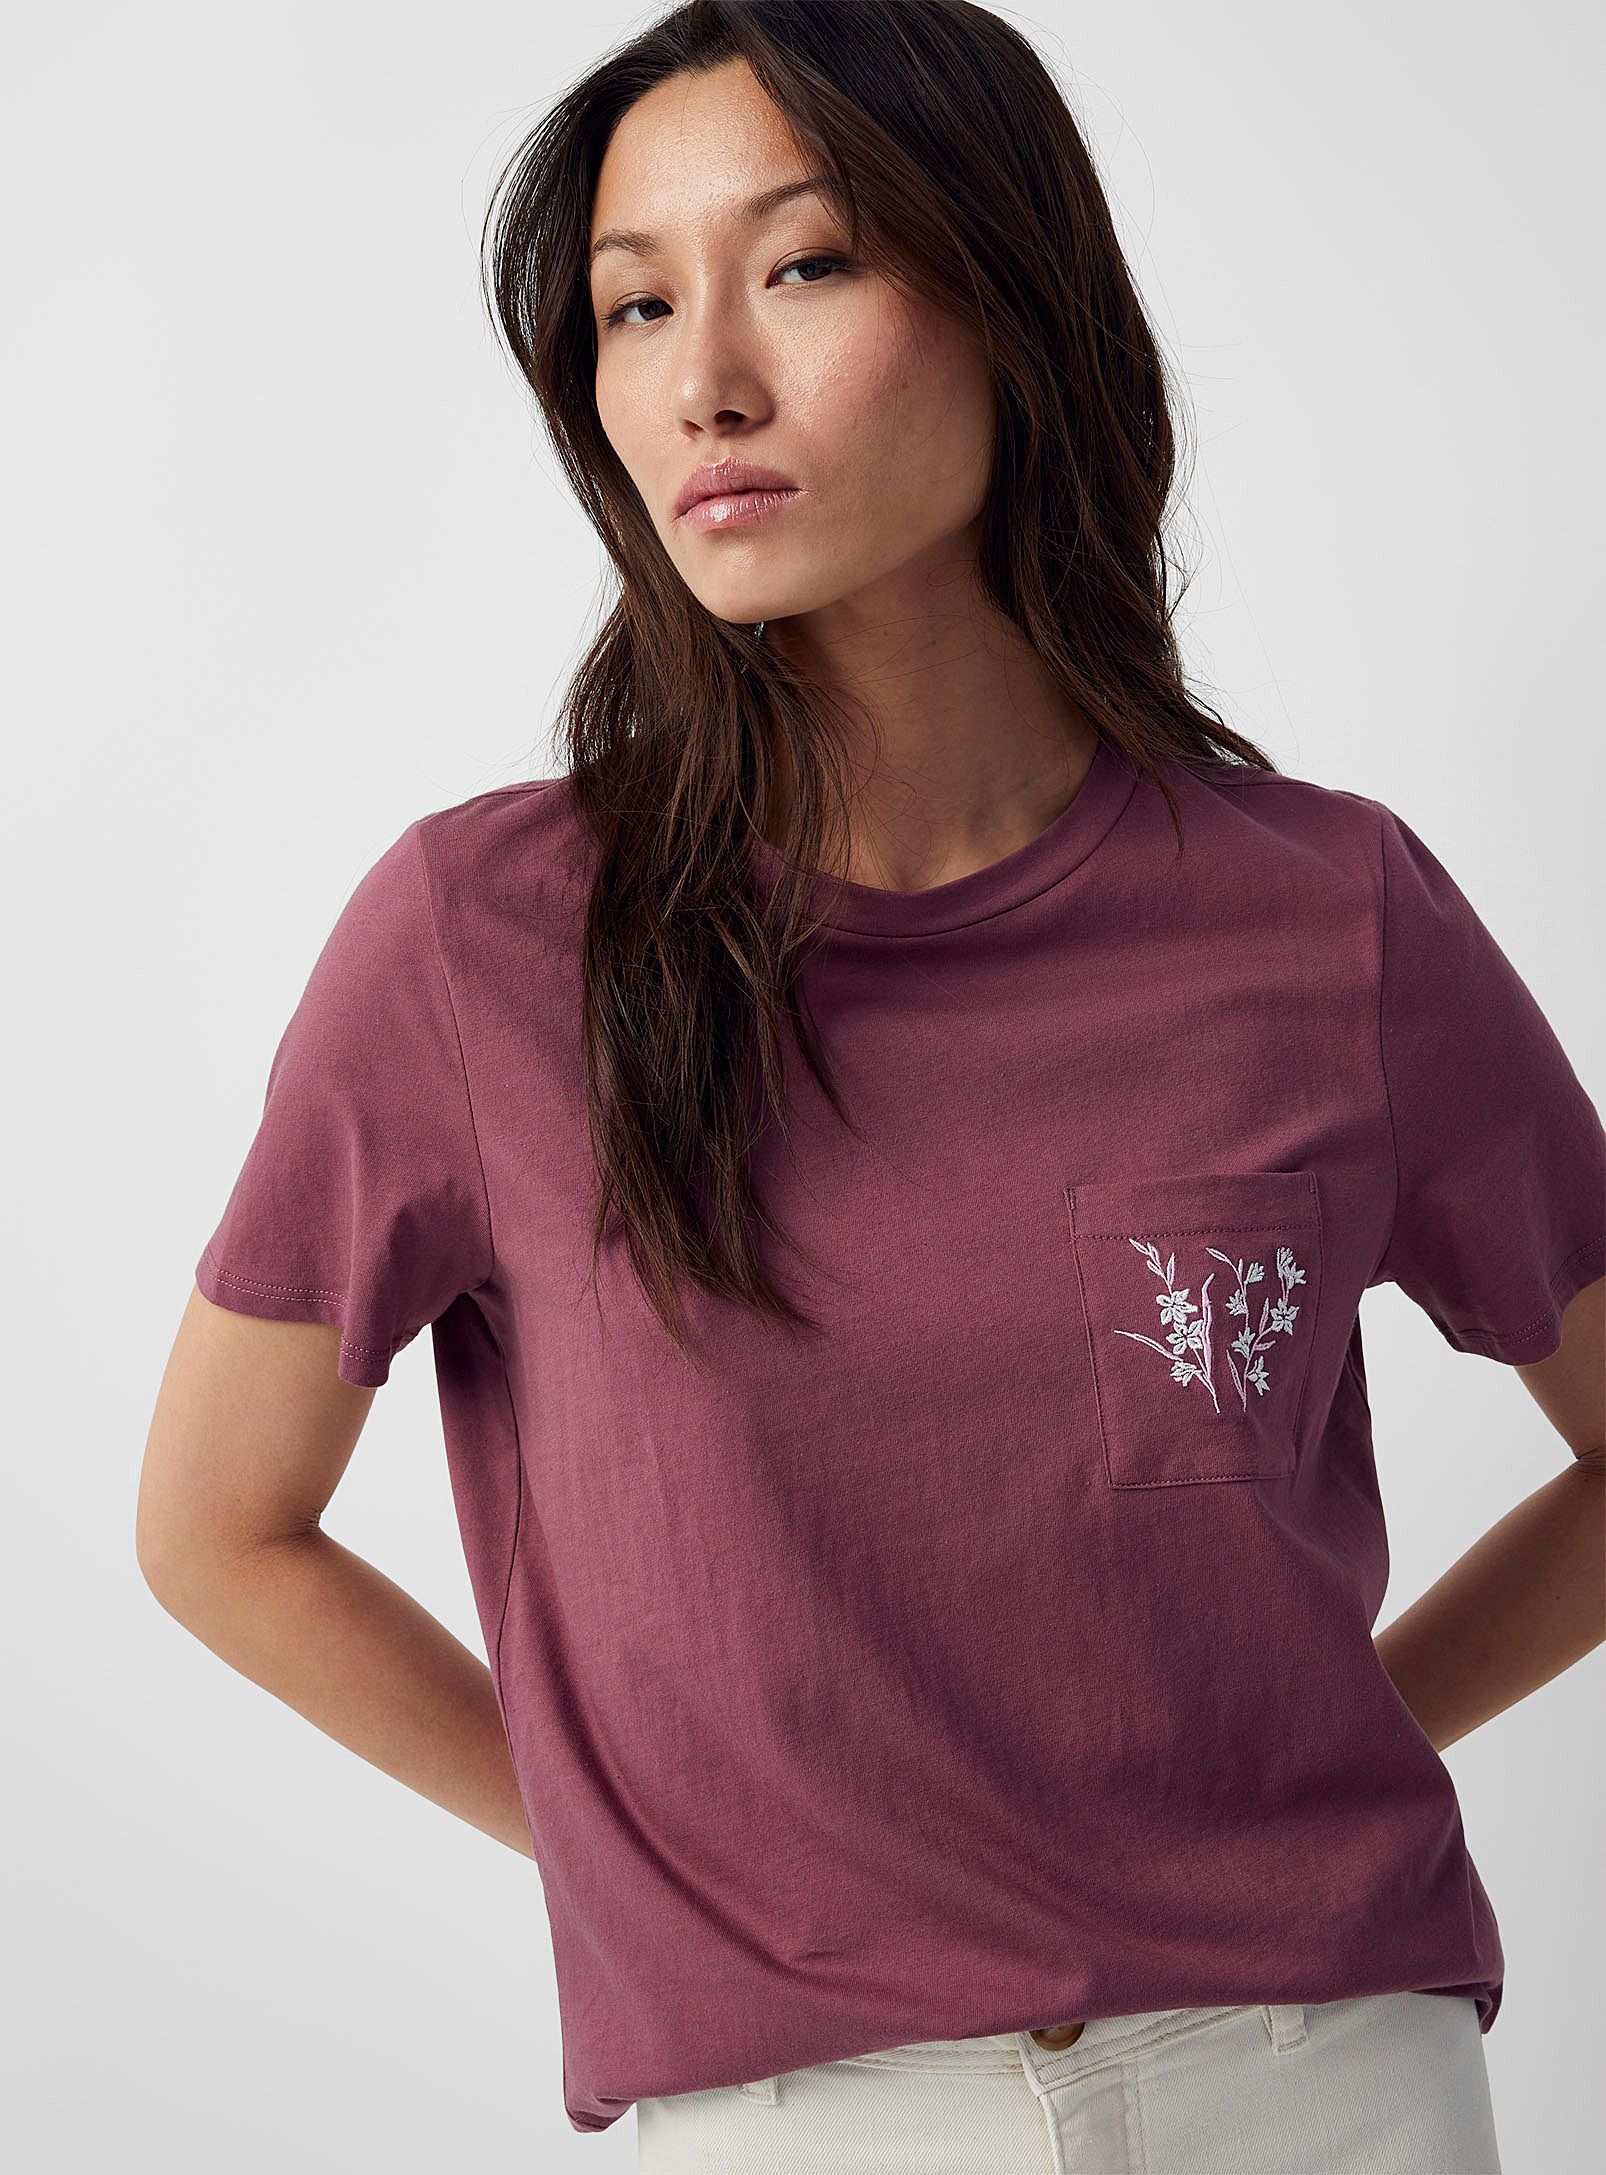 Contemporaine Floral Embroidery Pocket T-shirt In Patterned Crimson